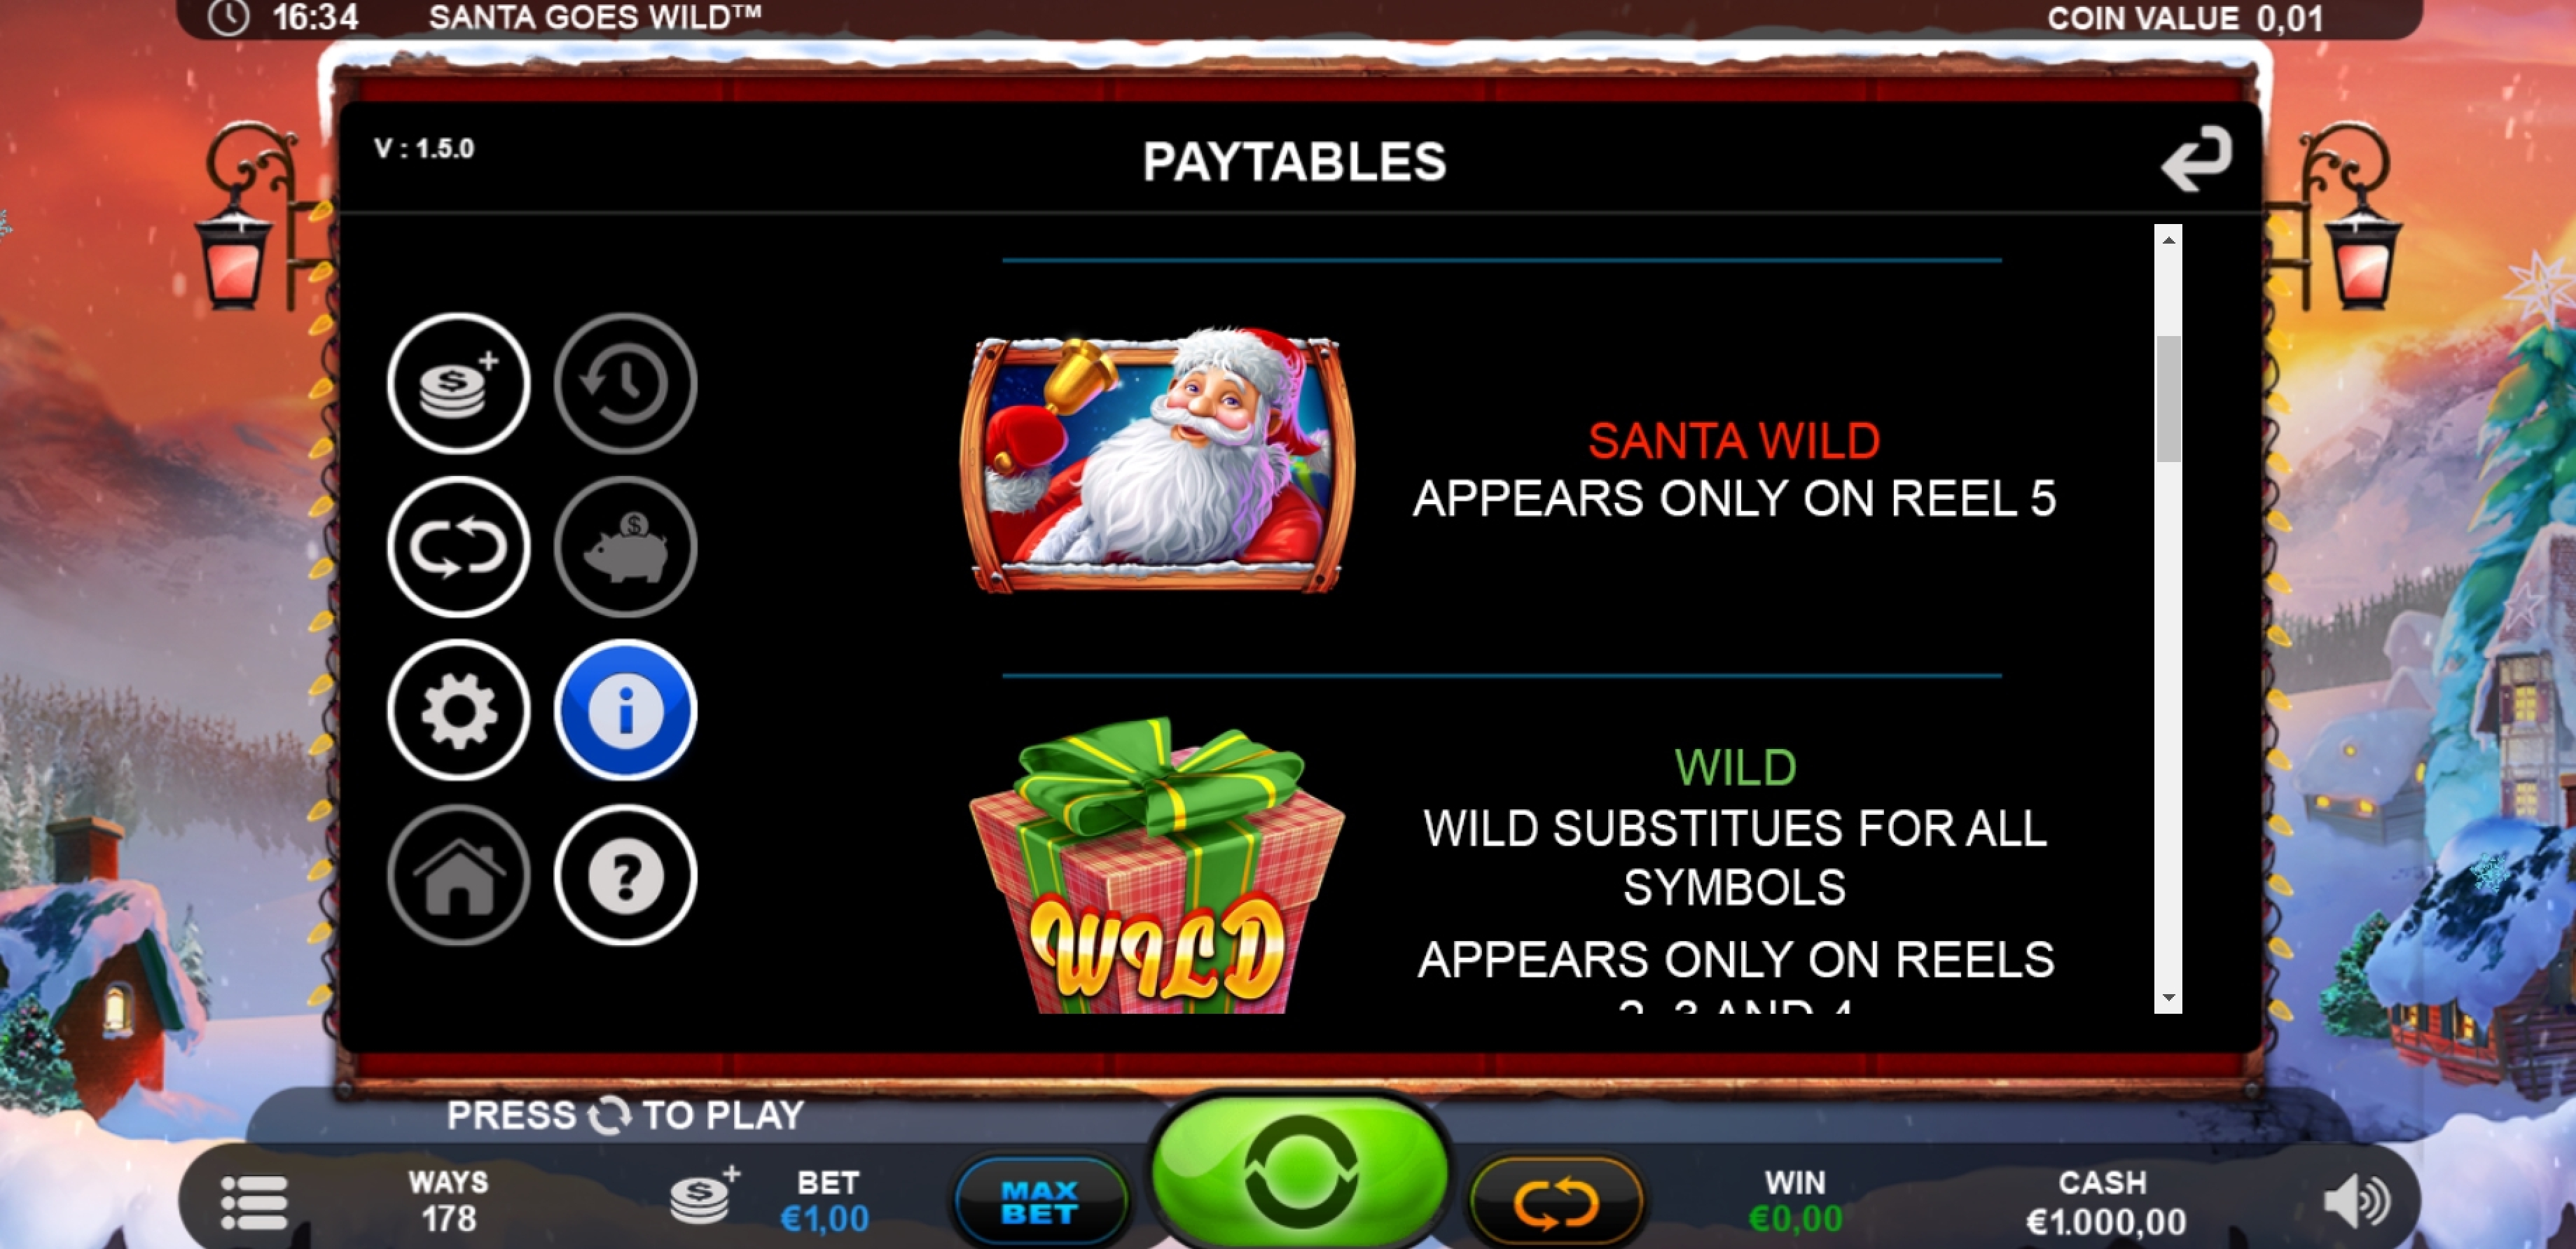 Info of Santa Goes Wild Slot Game by Plank Gaming